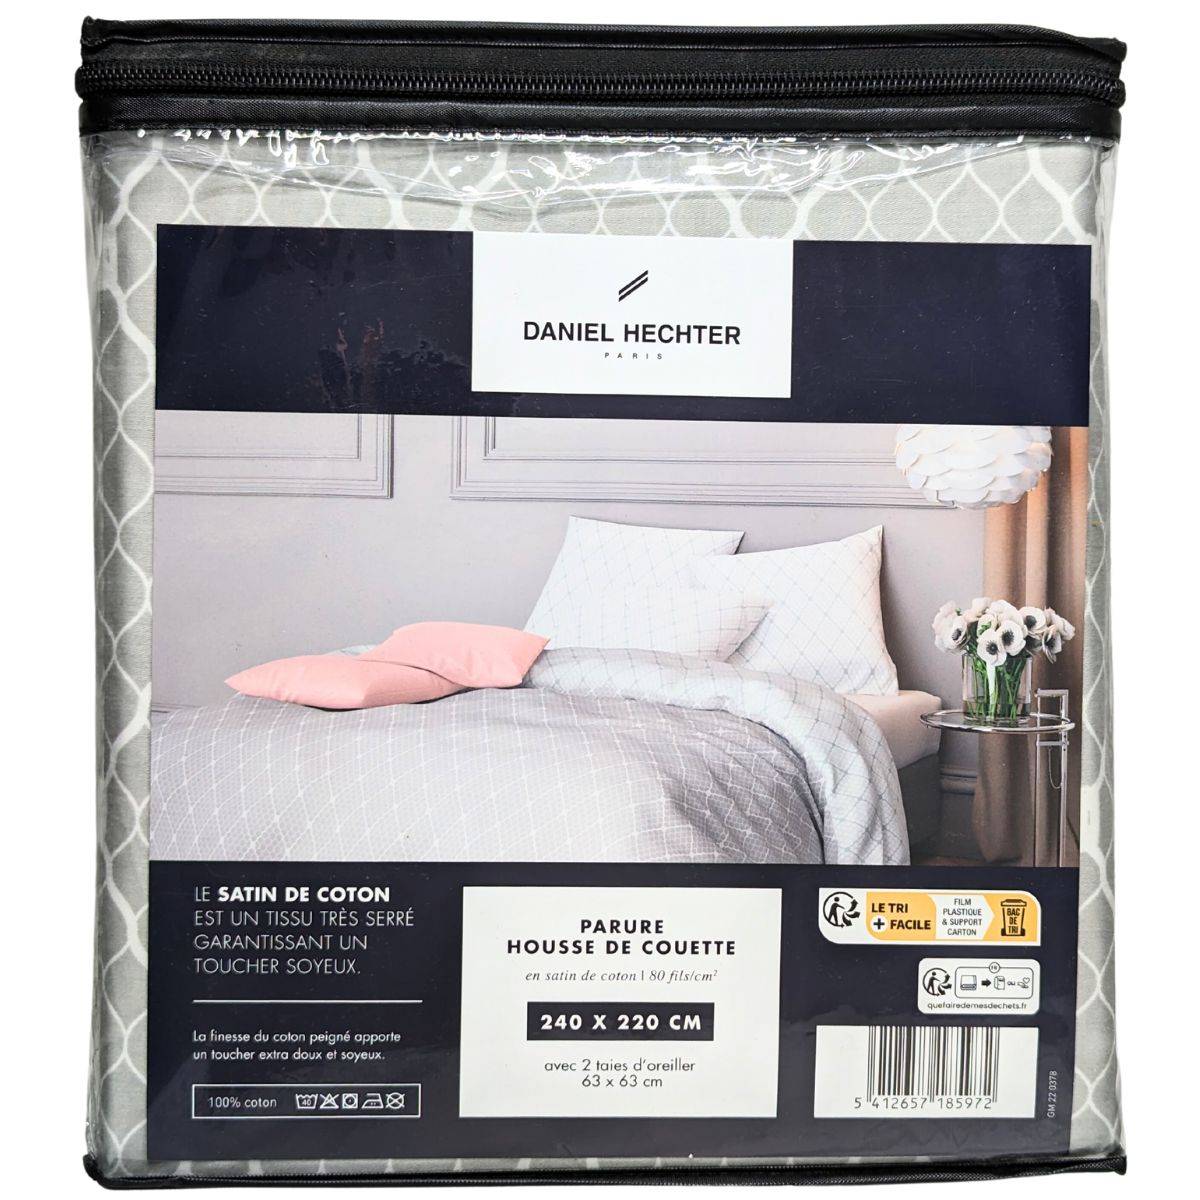 Duvet cover at discount prices - MaxxiDiscount